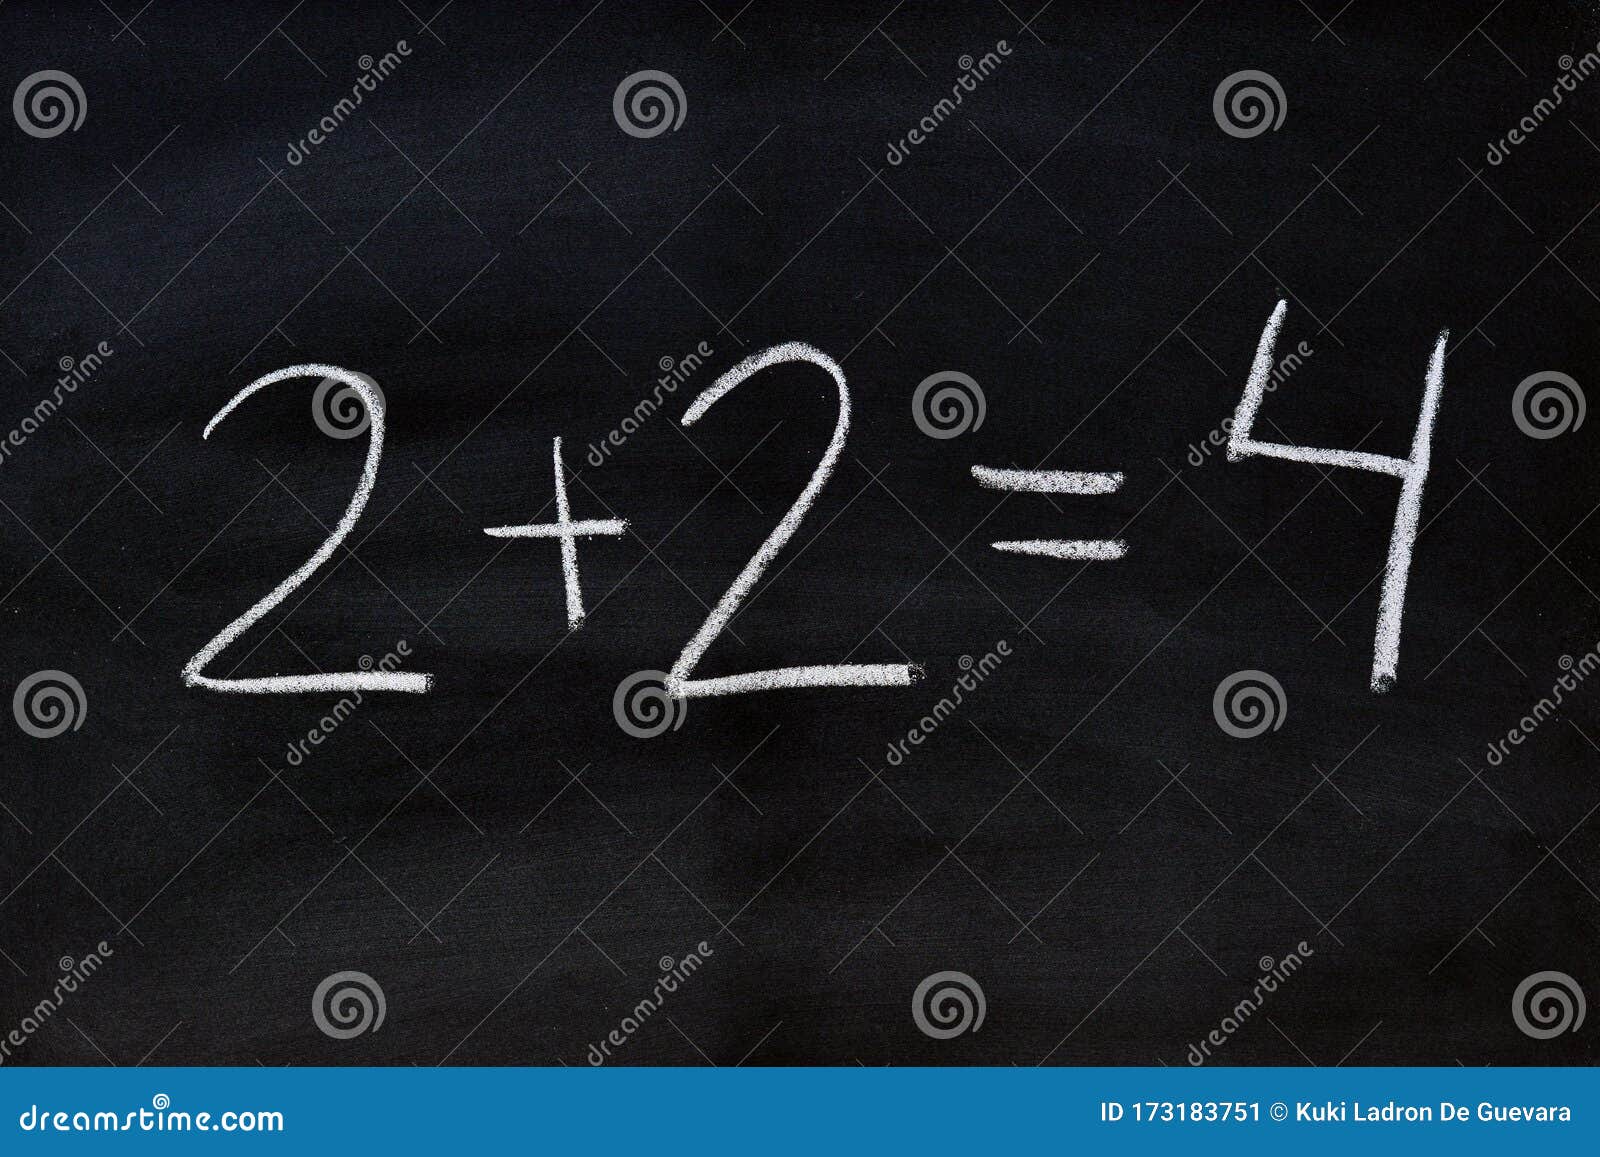 two plus two equals four, written on a blackboard